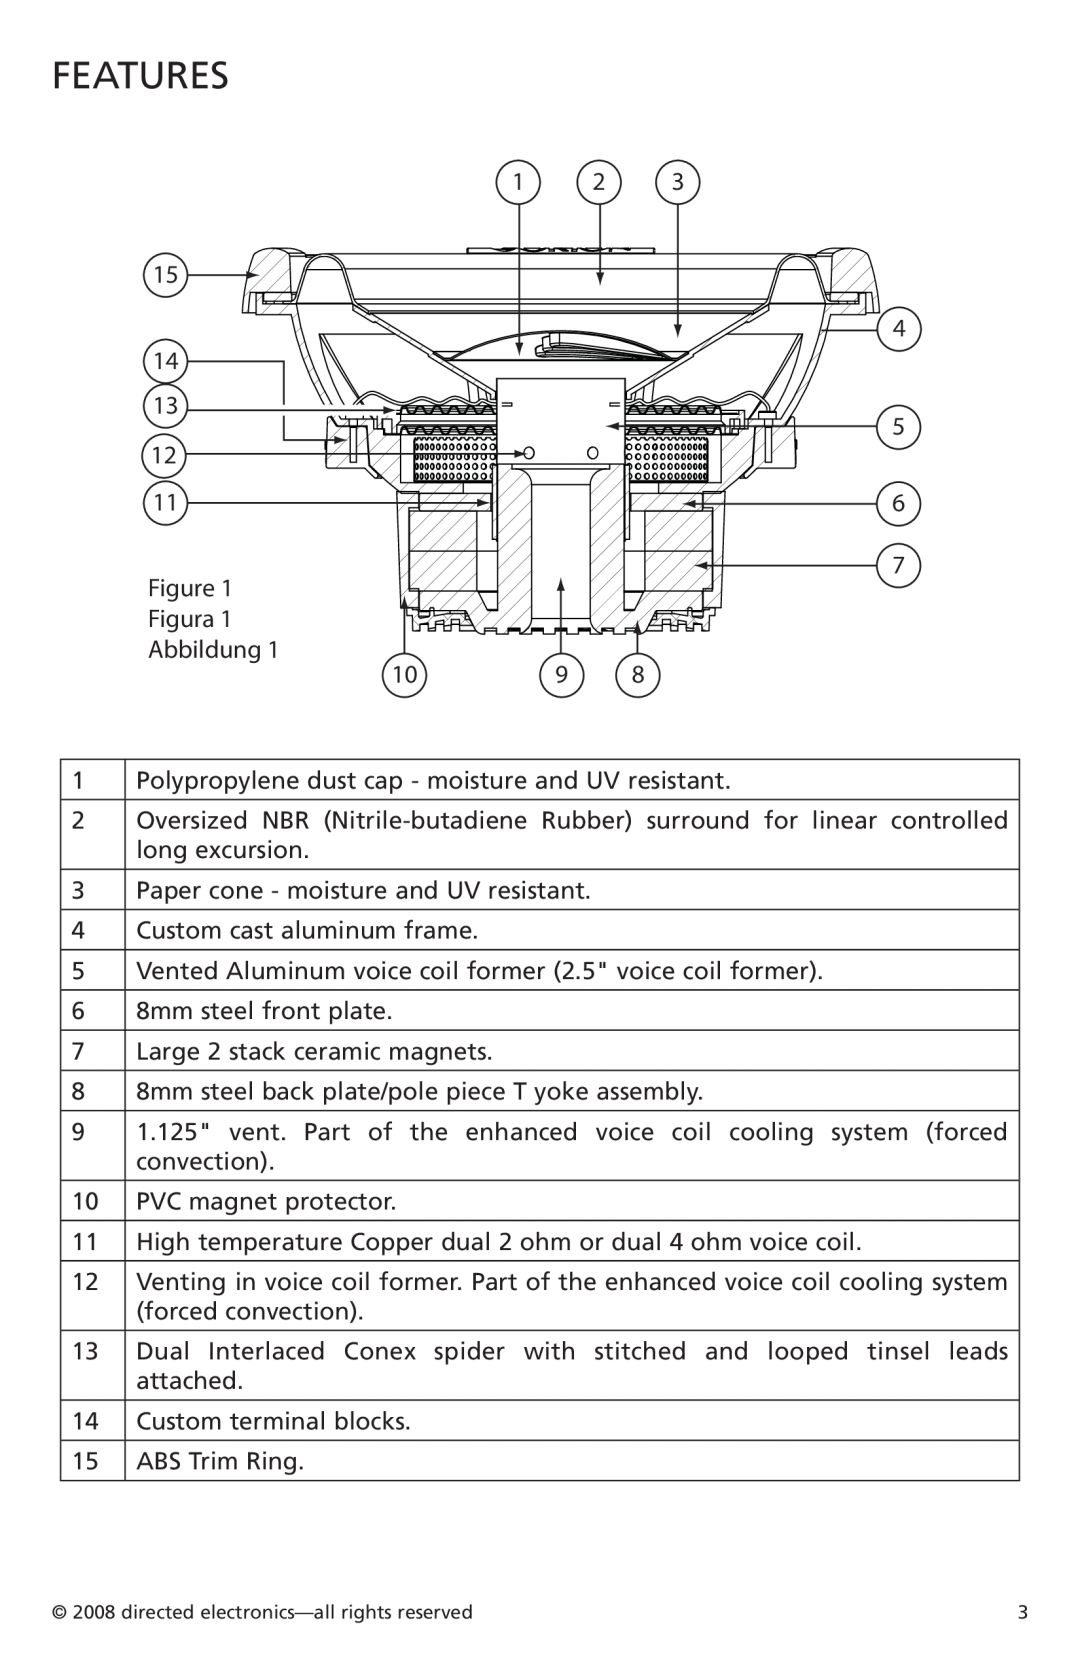 Orion Car Audio XTRPRO122, XTRPRO154, XTRPRO152, XTRPRO124, XTRPRO102, XTRPRO104 owner manual Features 